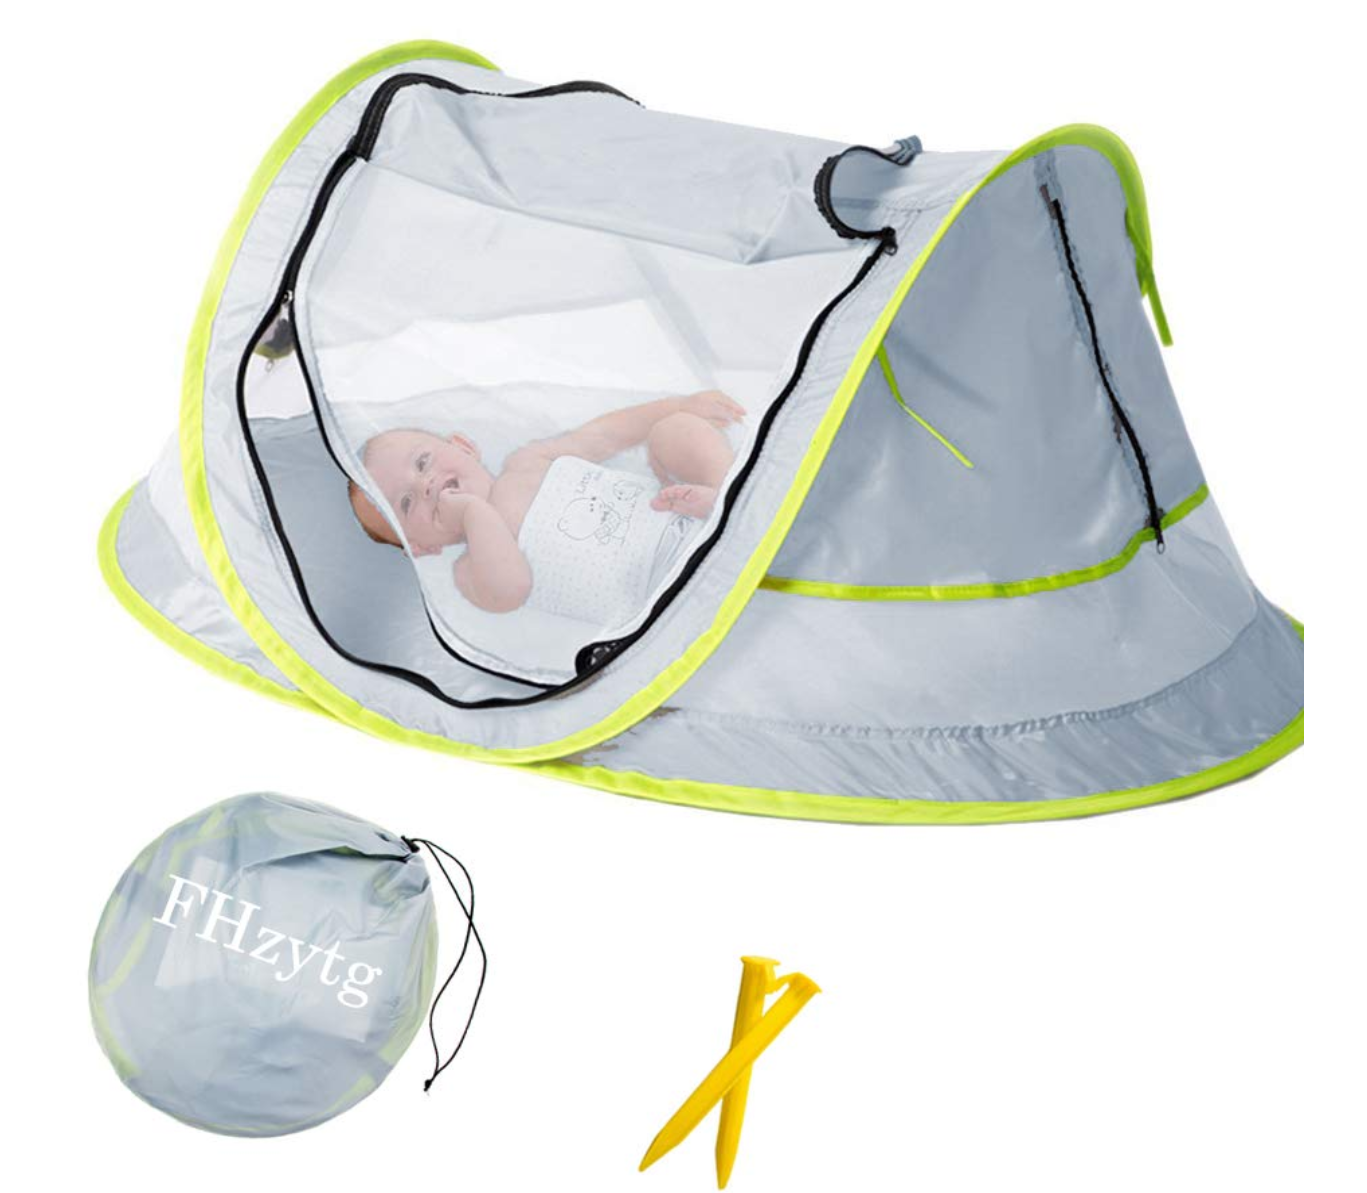 Aiernuo Large Baby Beach Tent